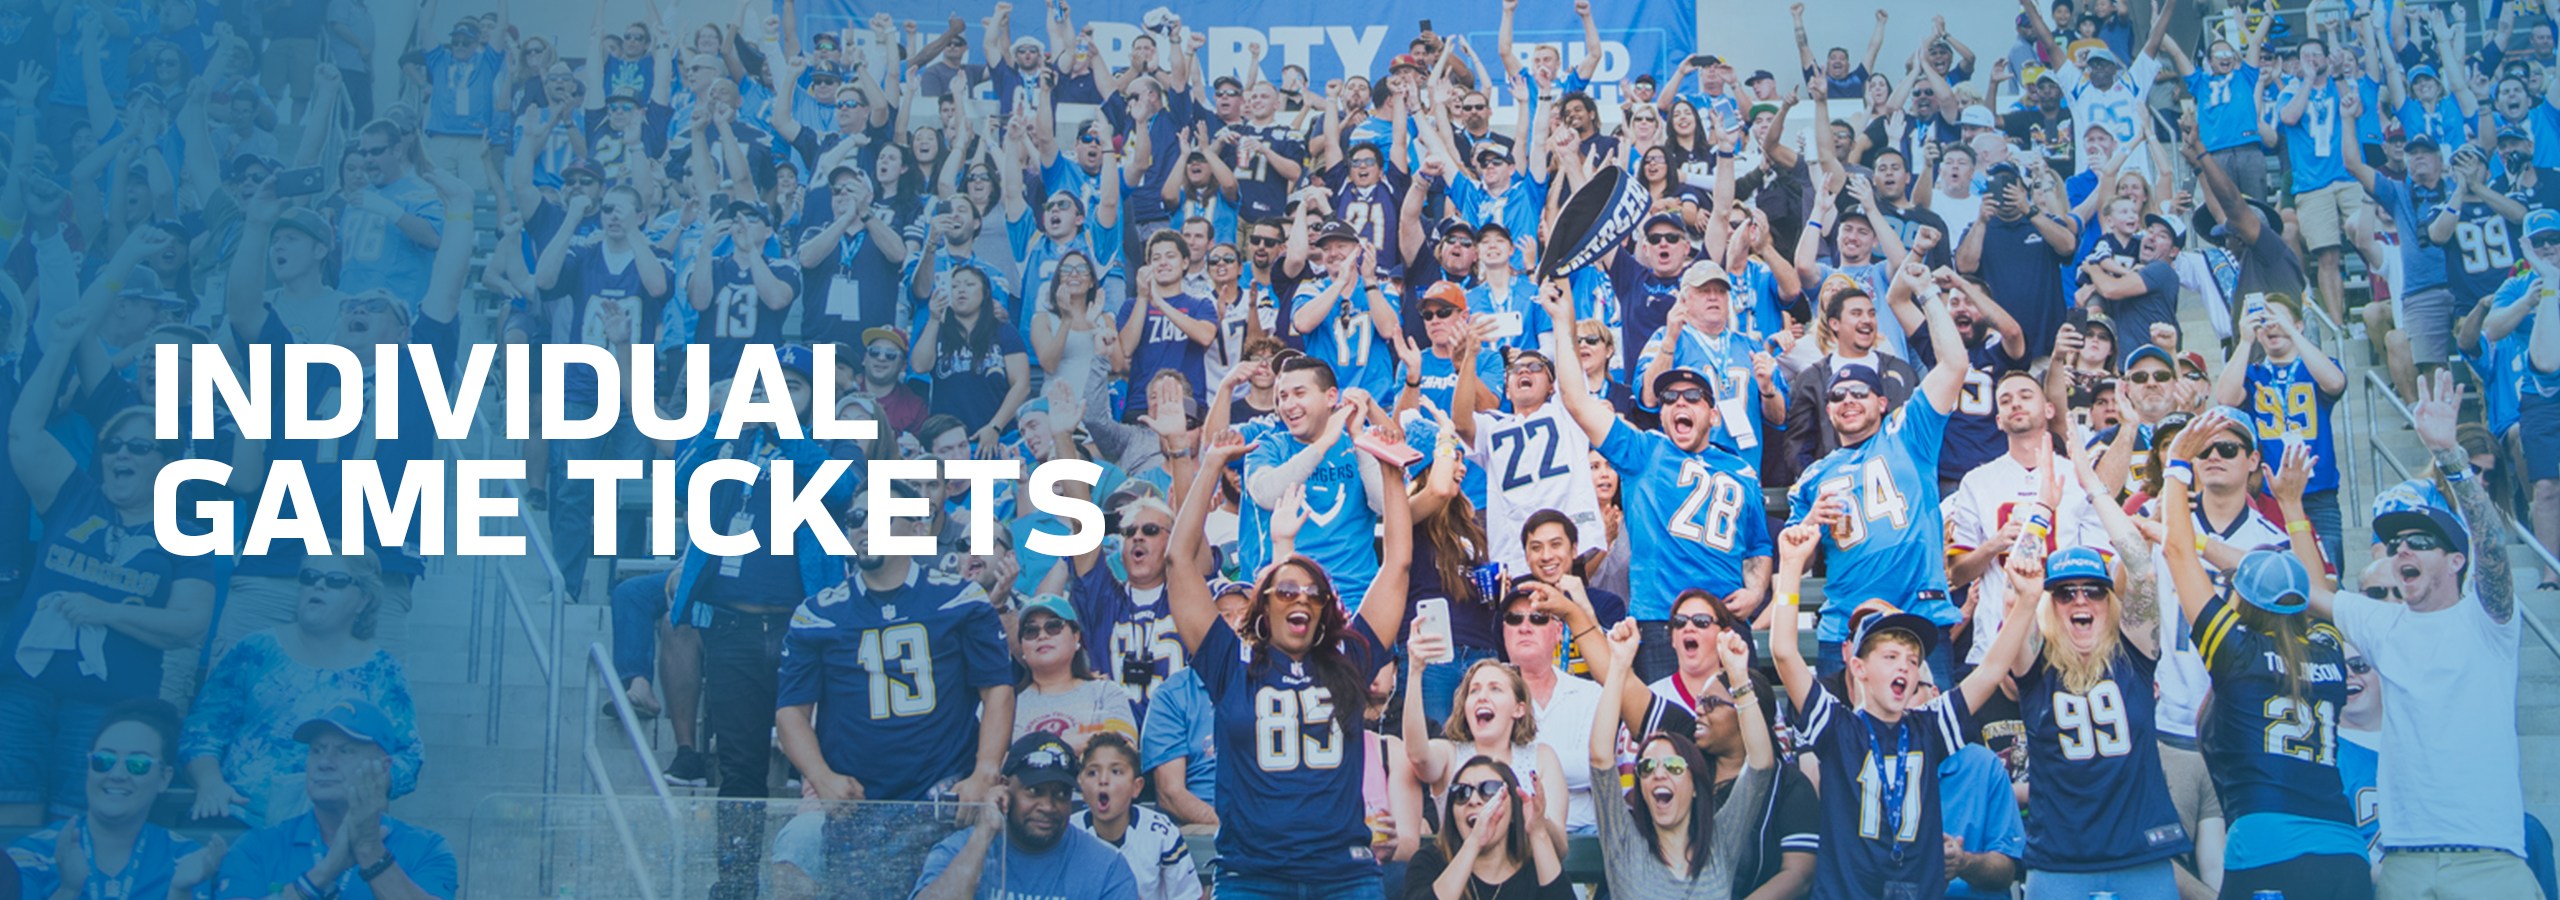 Individual Game Tickets Los Angeles Chargers